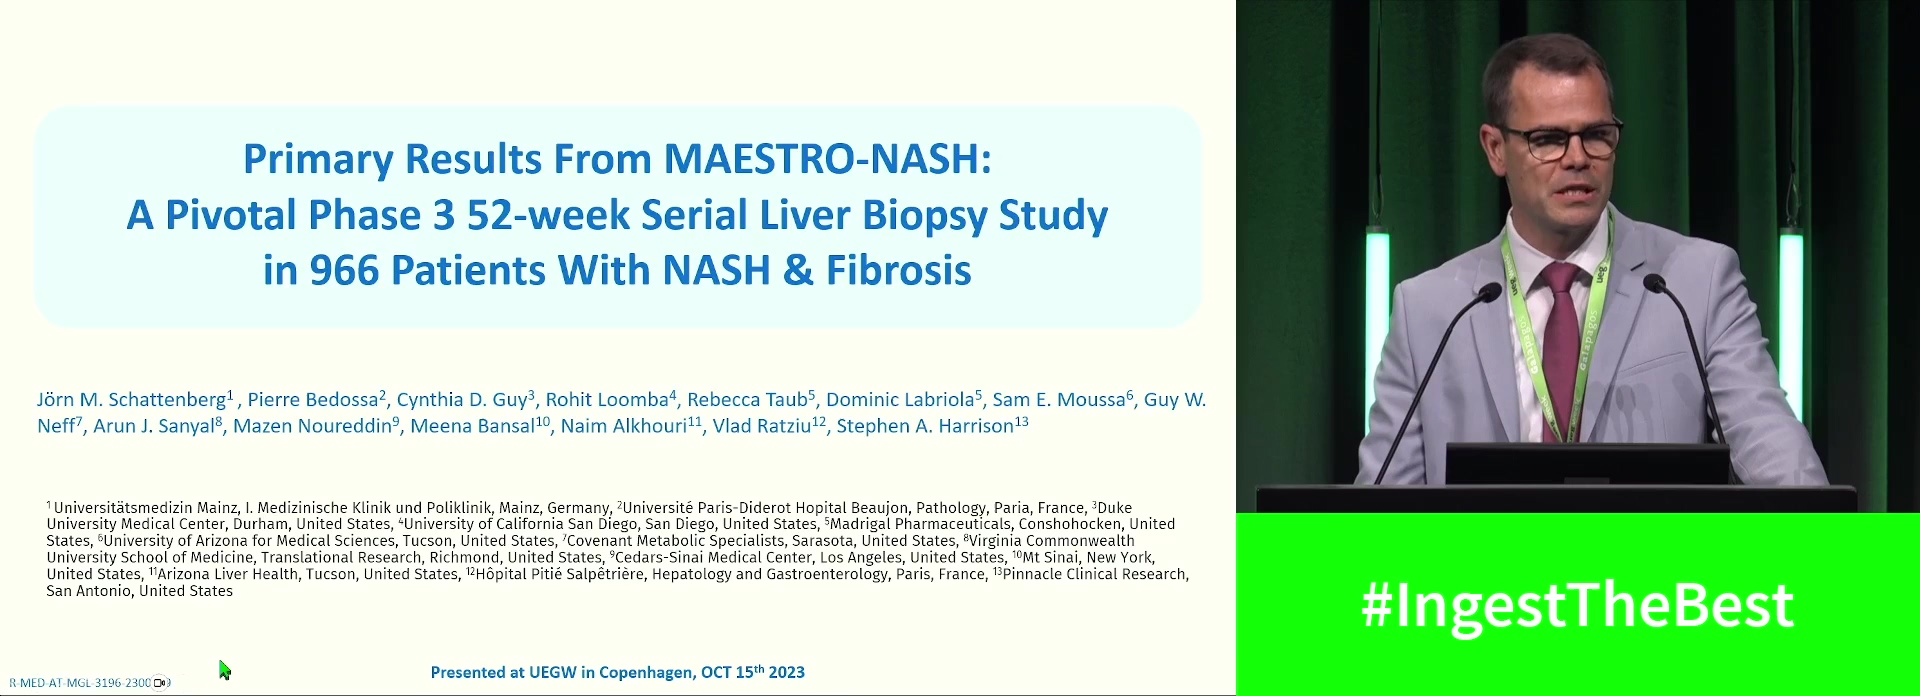 A RANDOMIZED CONTROLLED PHASE 3 TRIAL OF RESMETIROM IN NONALCOHOLIC STEATOHEPATITIS: 52-WEEK DATA FROM MAESTRO-NASH